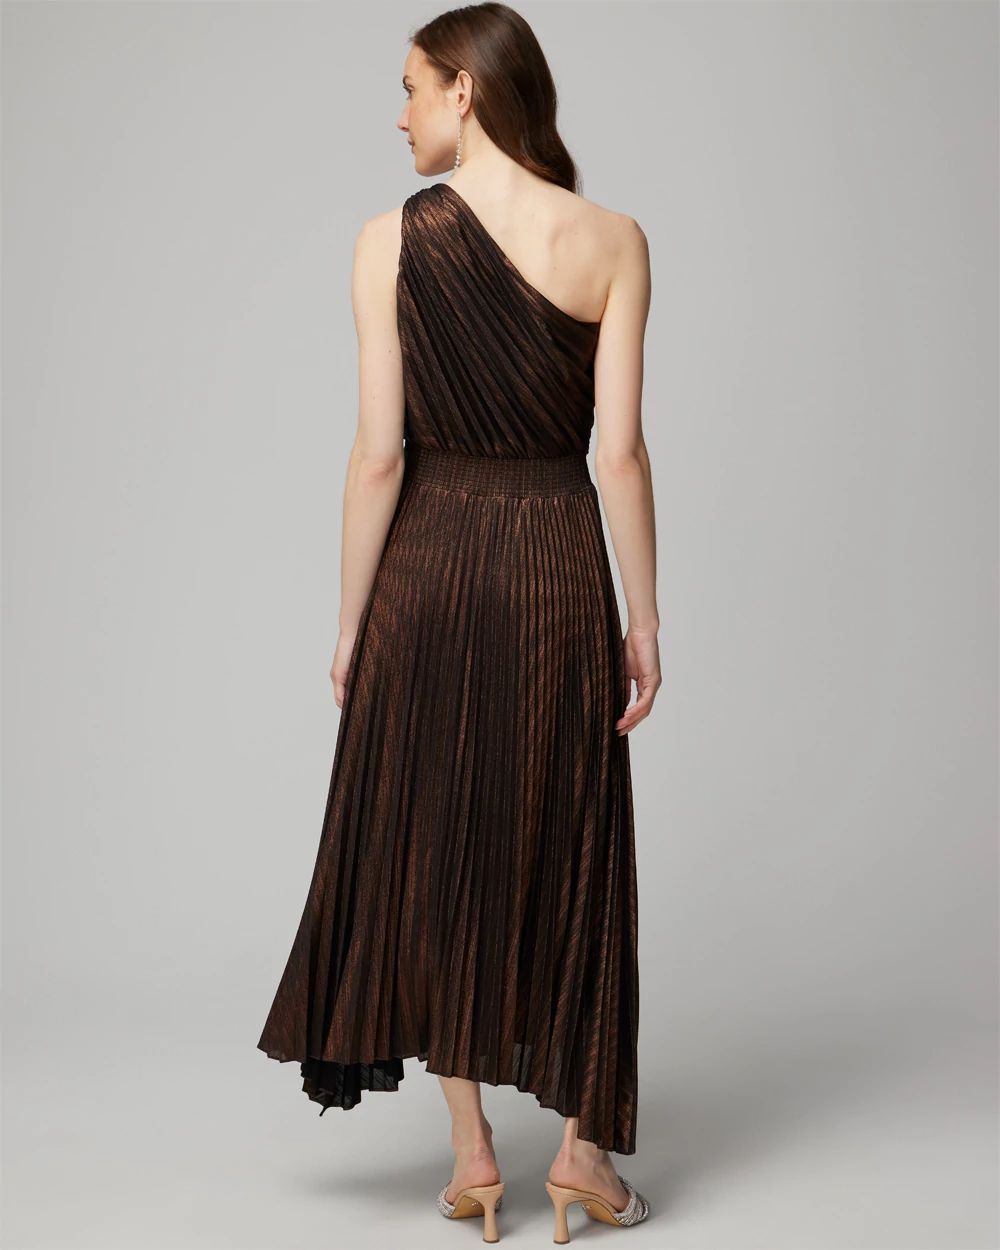 One-Shoulder Bronze Pleated Maxi Dress click to view larger image.